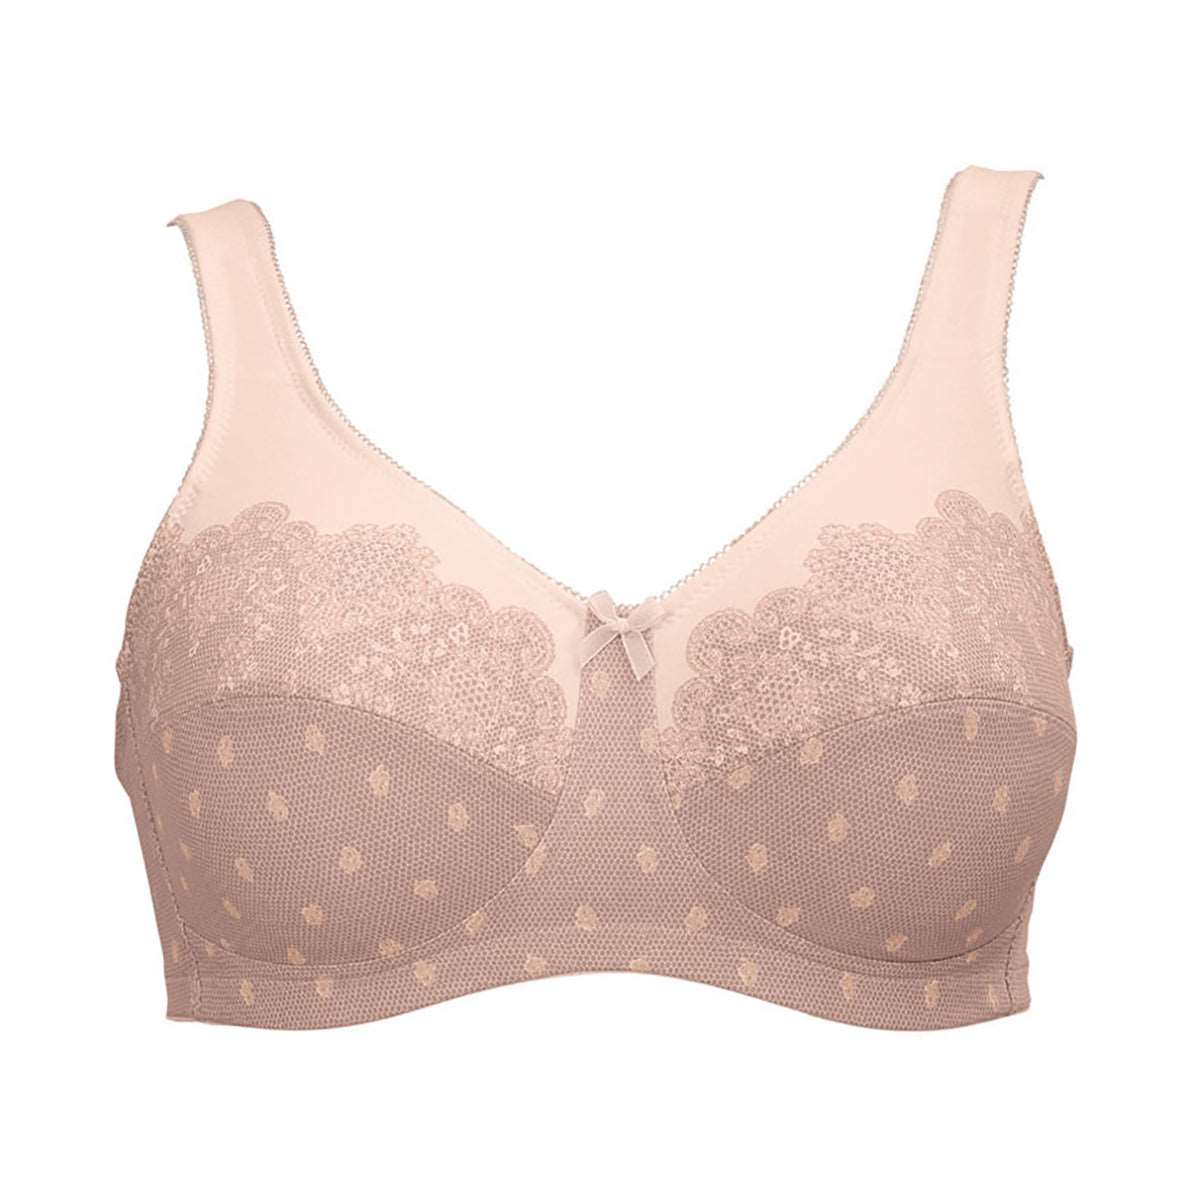 Tips on Mastectomy Bras & Prostheses Fittings - Nightingale Medical Supplies